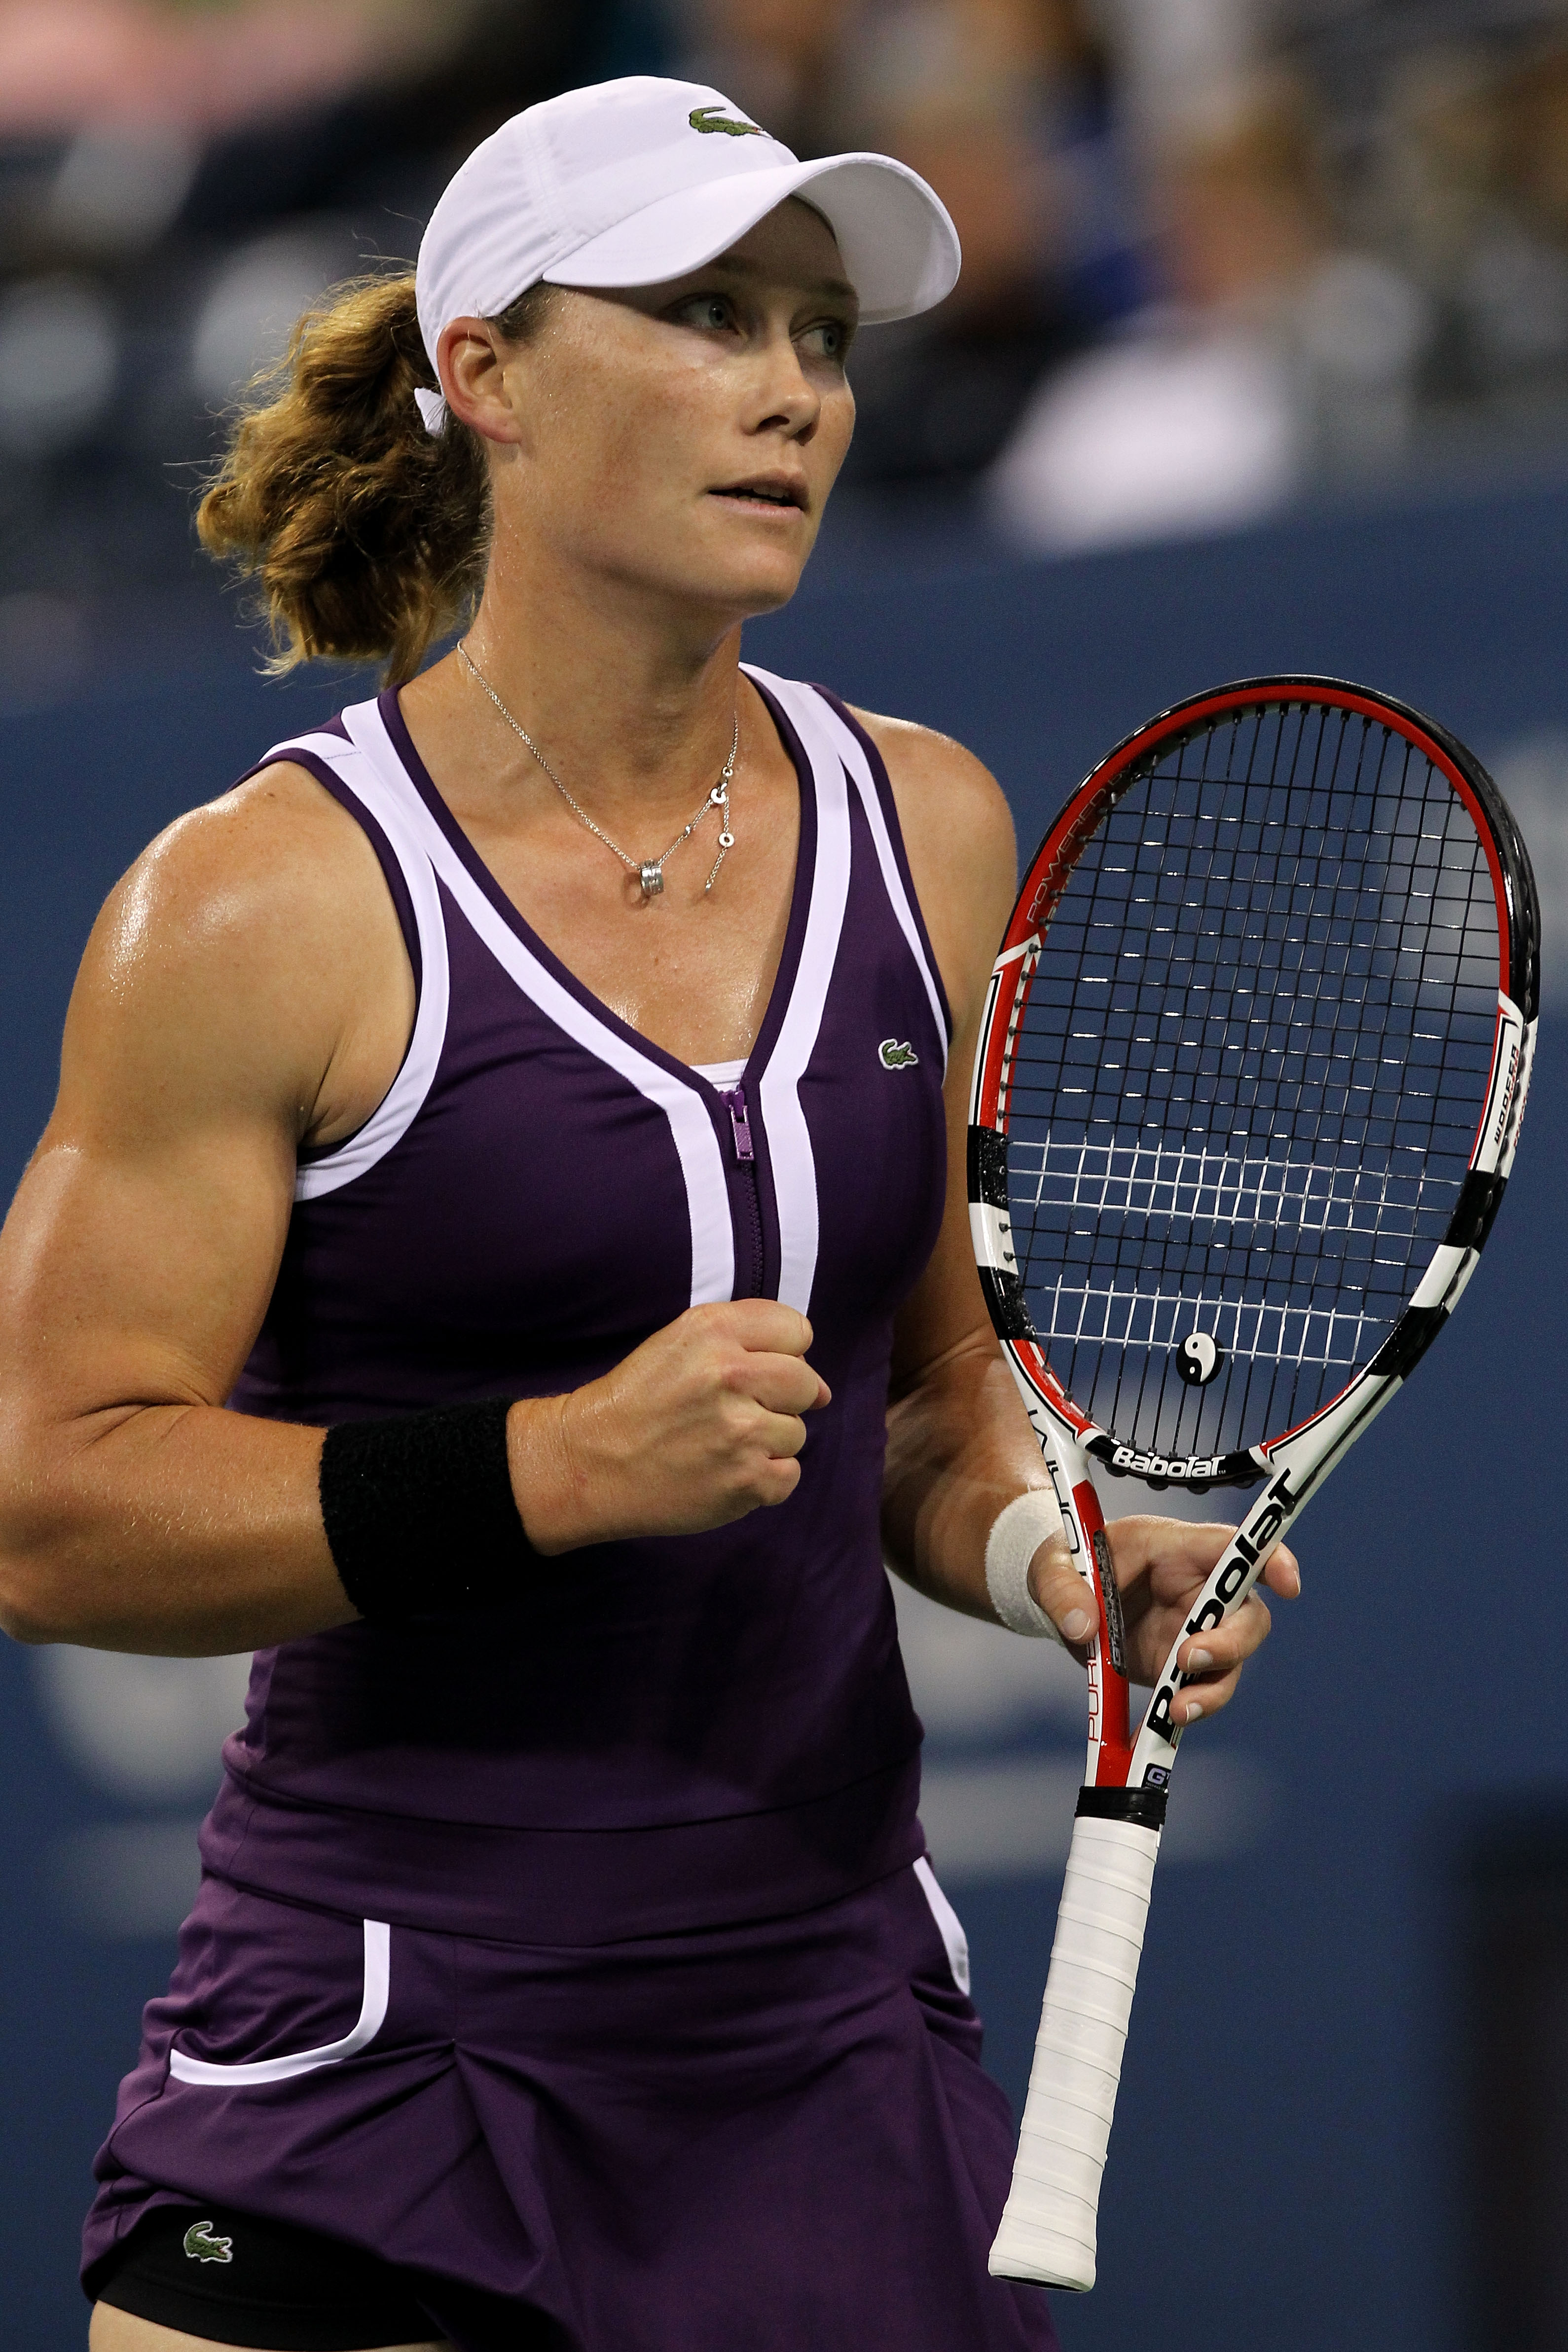 NEW YORK - SEPTEMBER 05:  Samantha Stosur of Australia reacts against Elena Dementieva of Russia during her women's singles match on day seven of the 2010 U.S. Open at the USTA Billie Jean King National Tennis Center on September 5, 2010 in the Flushing n